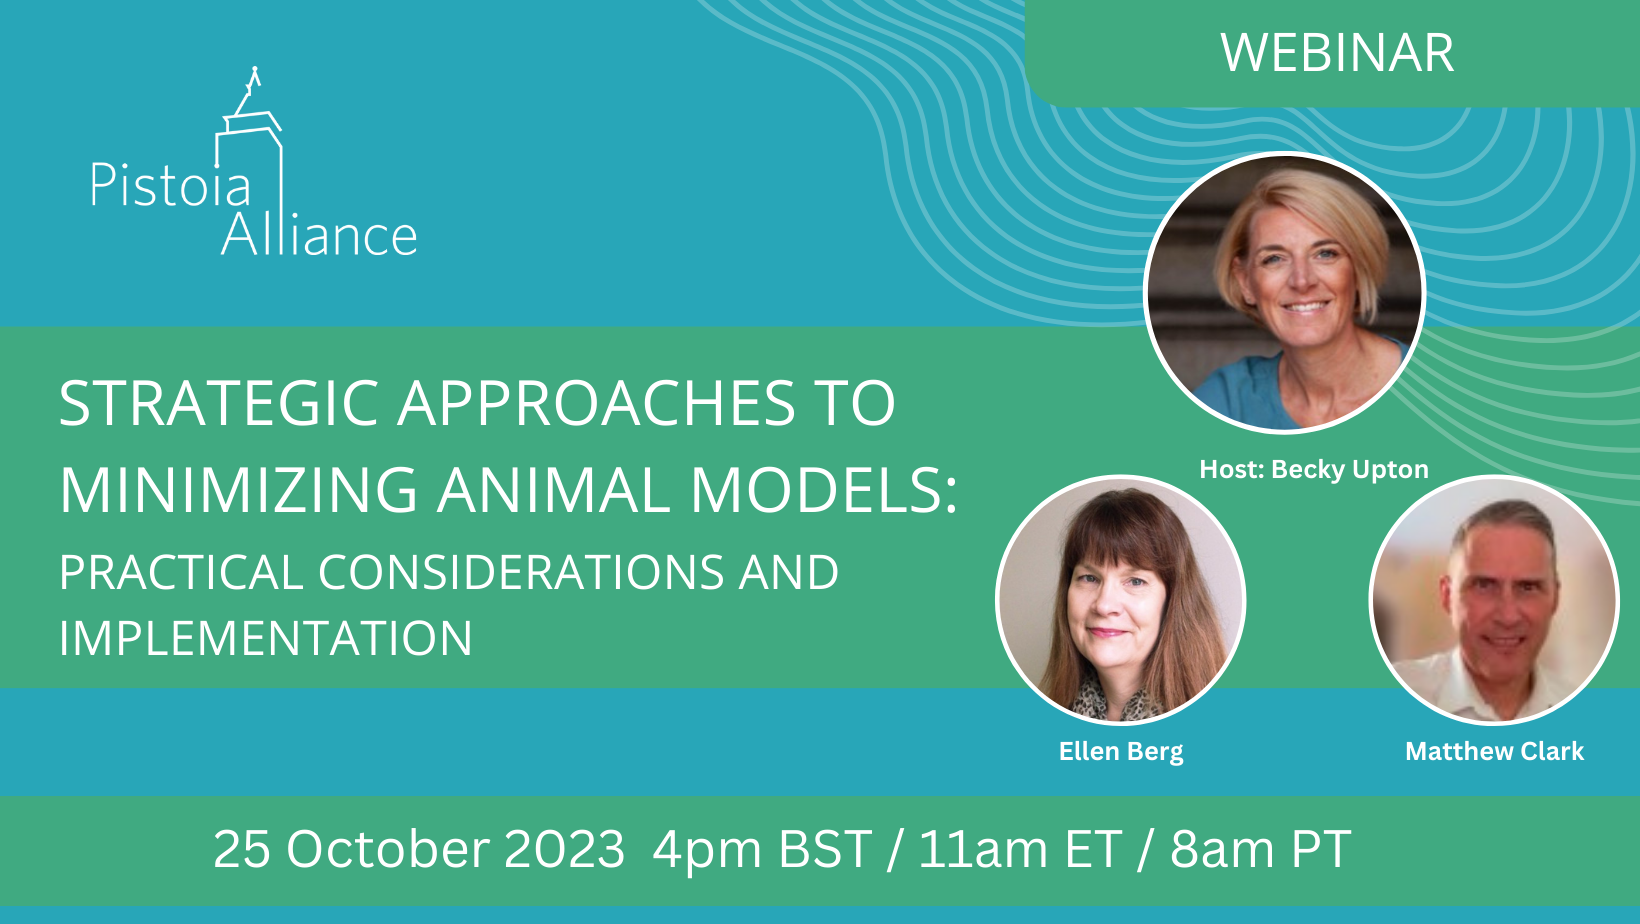 Strategic Approaches to Minimizing Animal Models: Practical Considerations and Implementation